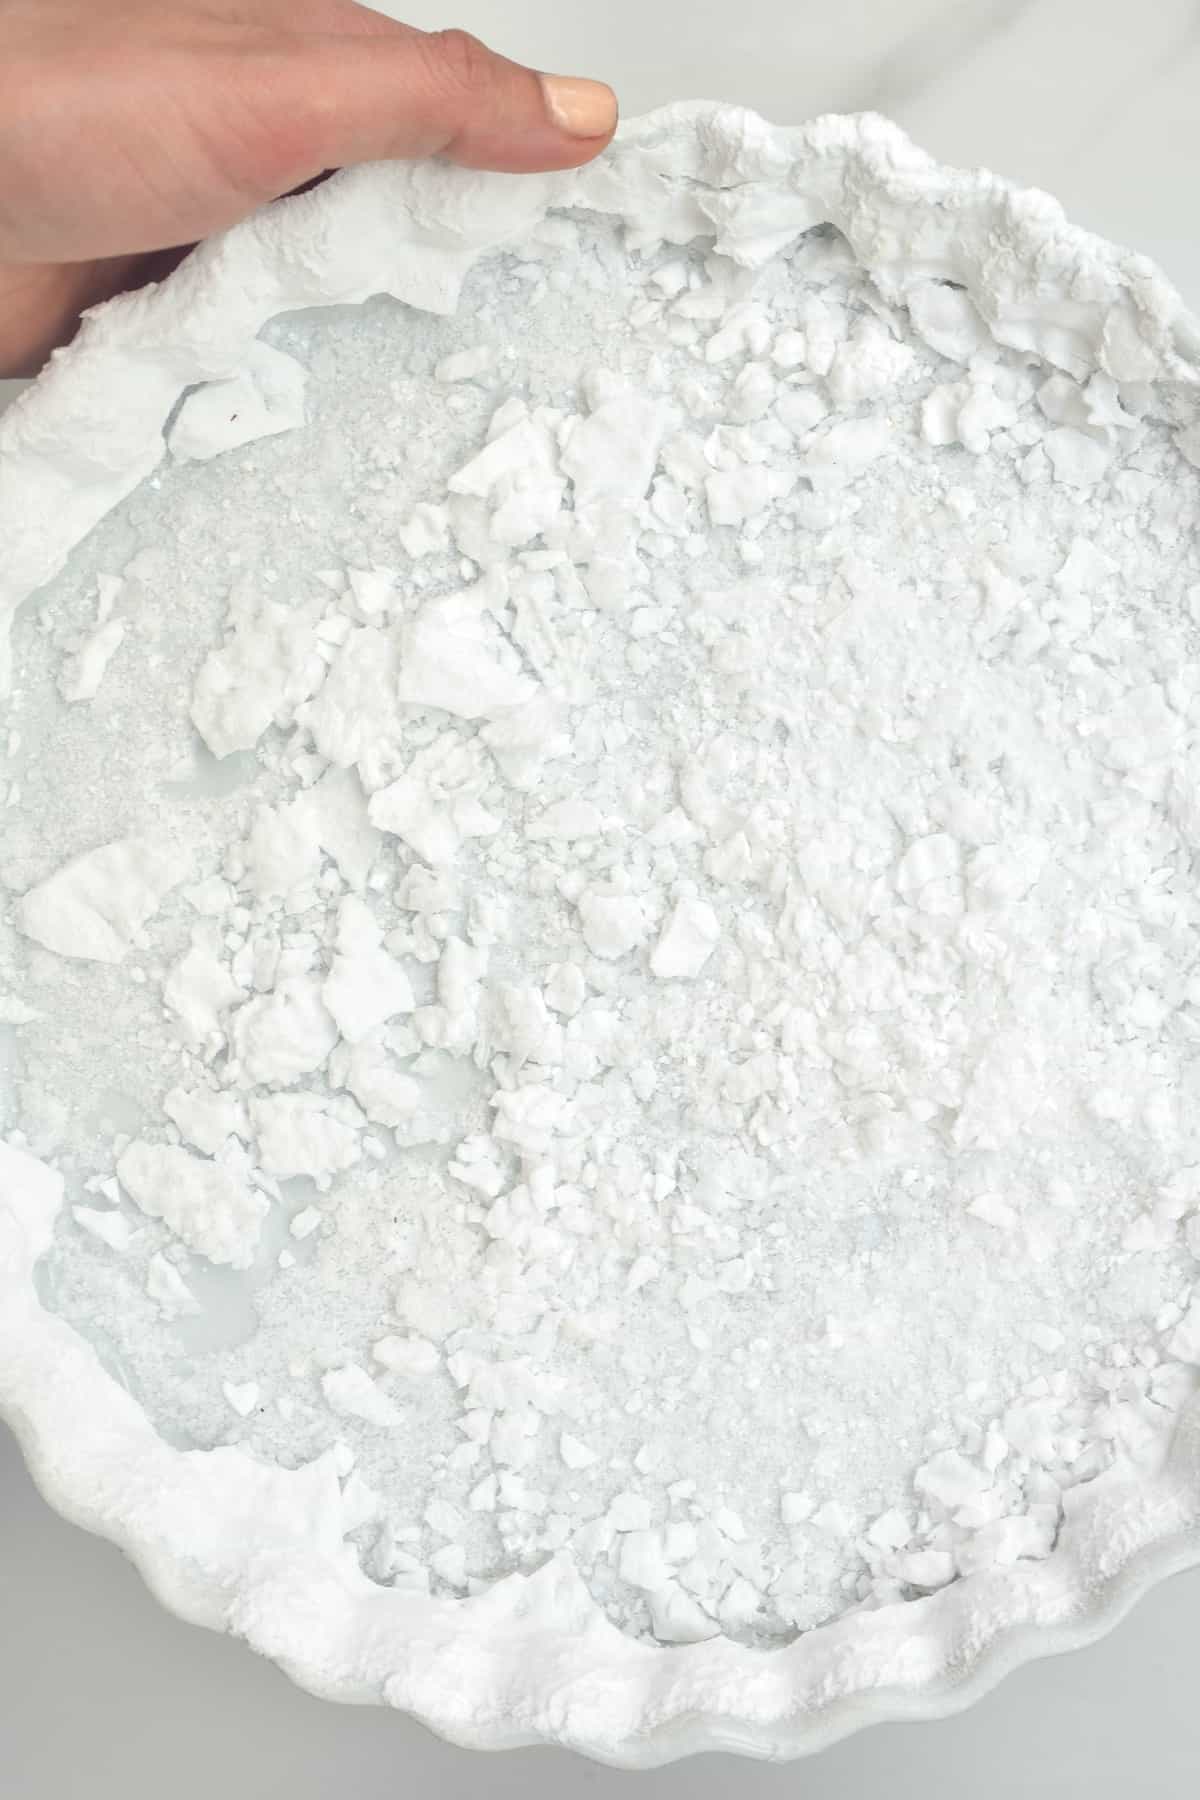 Flaky salt formed in a bowl